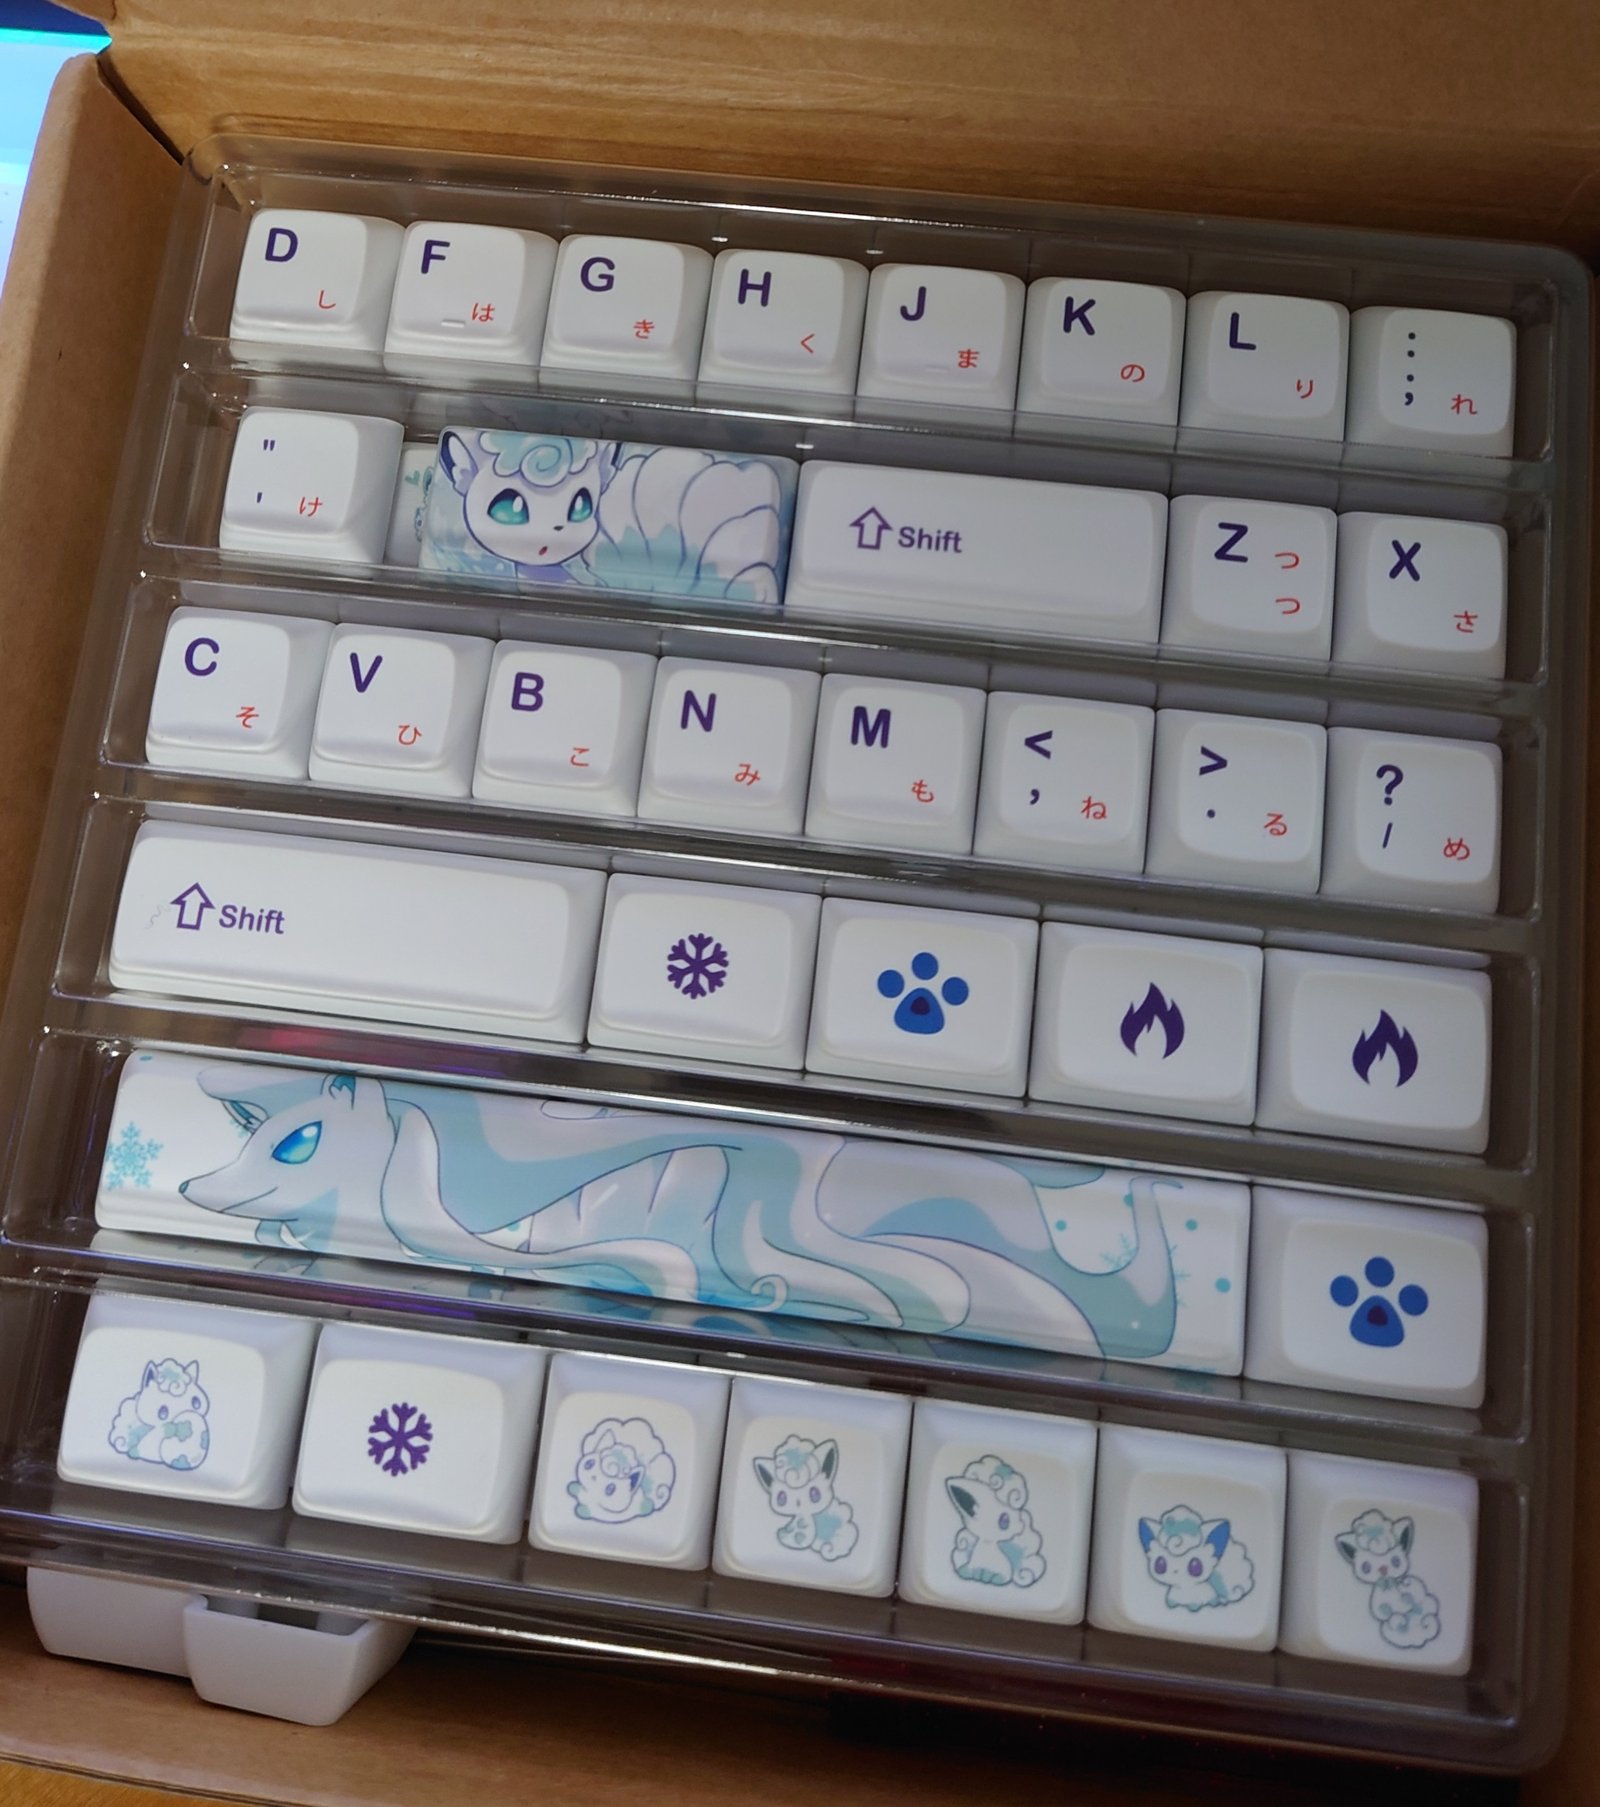 Ice Vulpix Pokemon Keycaps with Ninetales Alolan Design – A Touch of Gaming Style